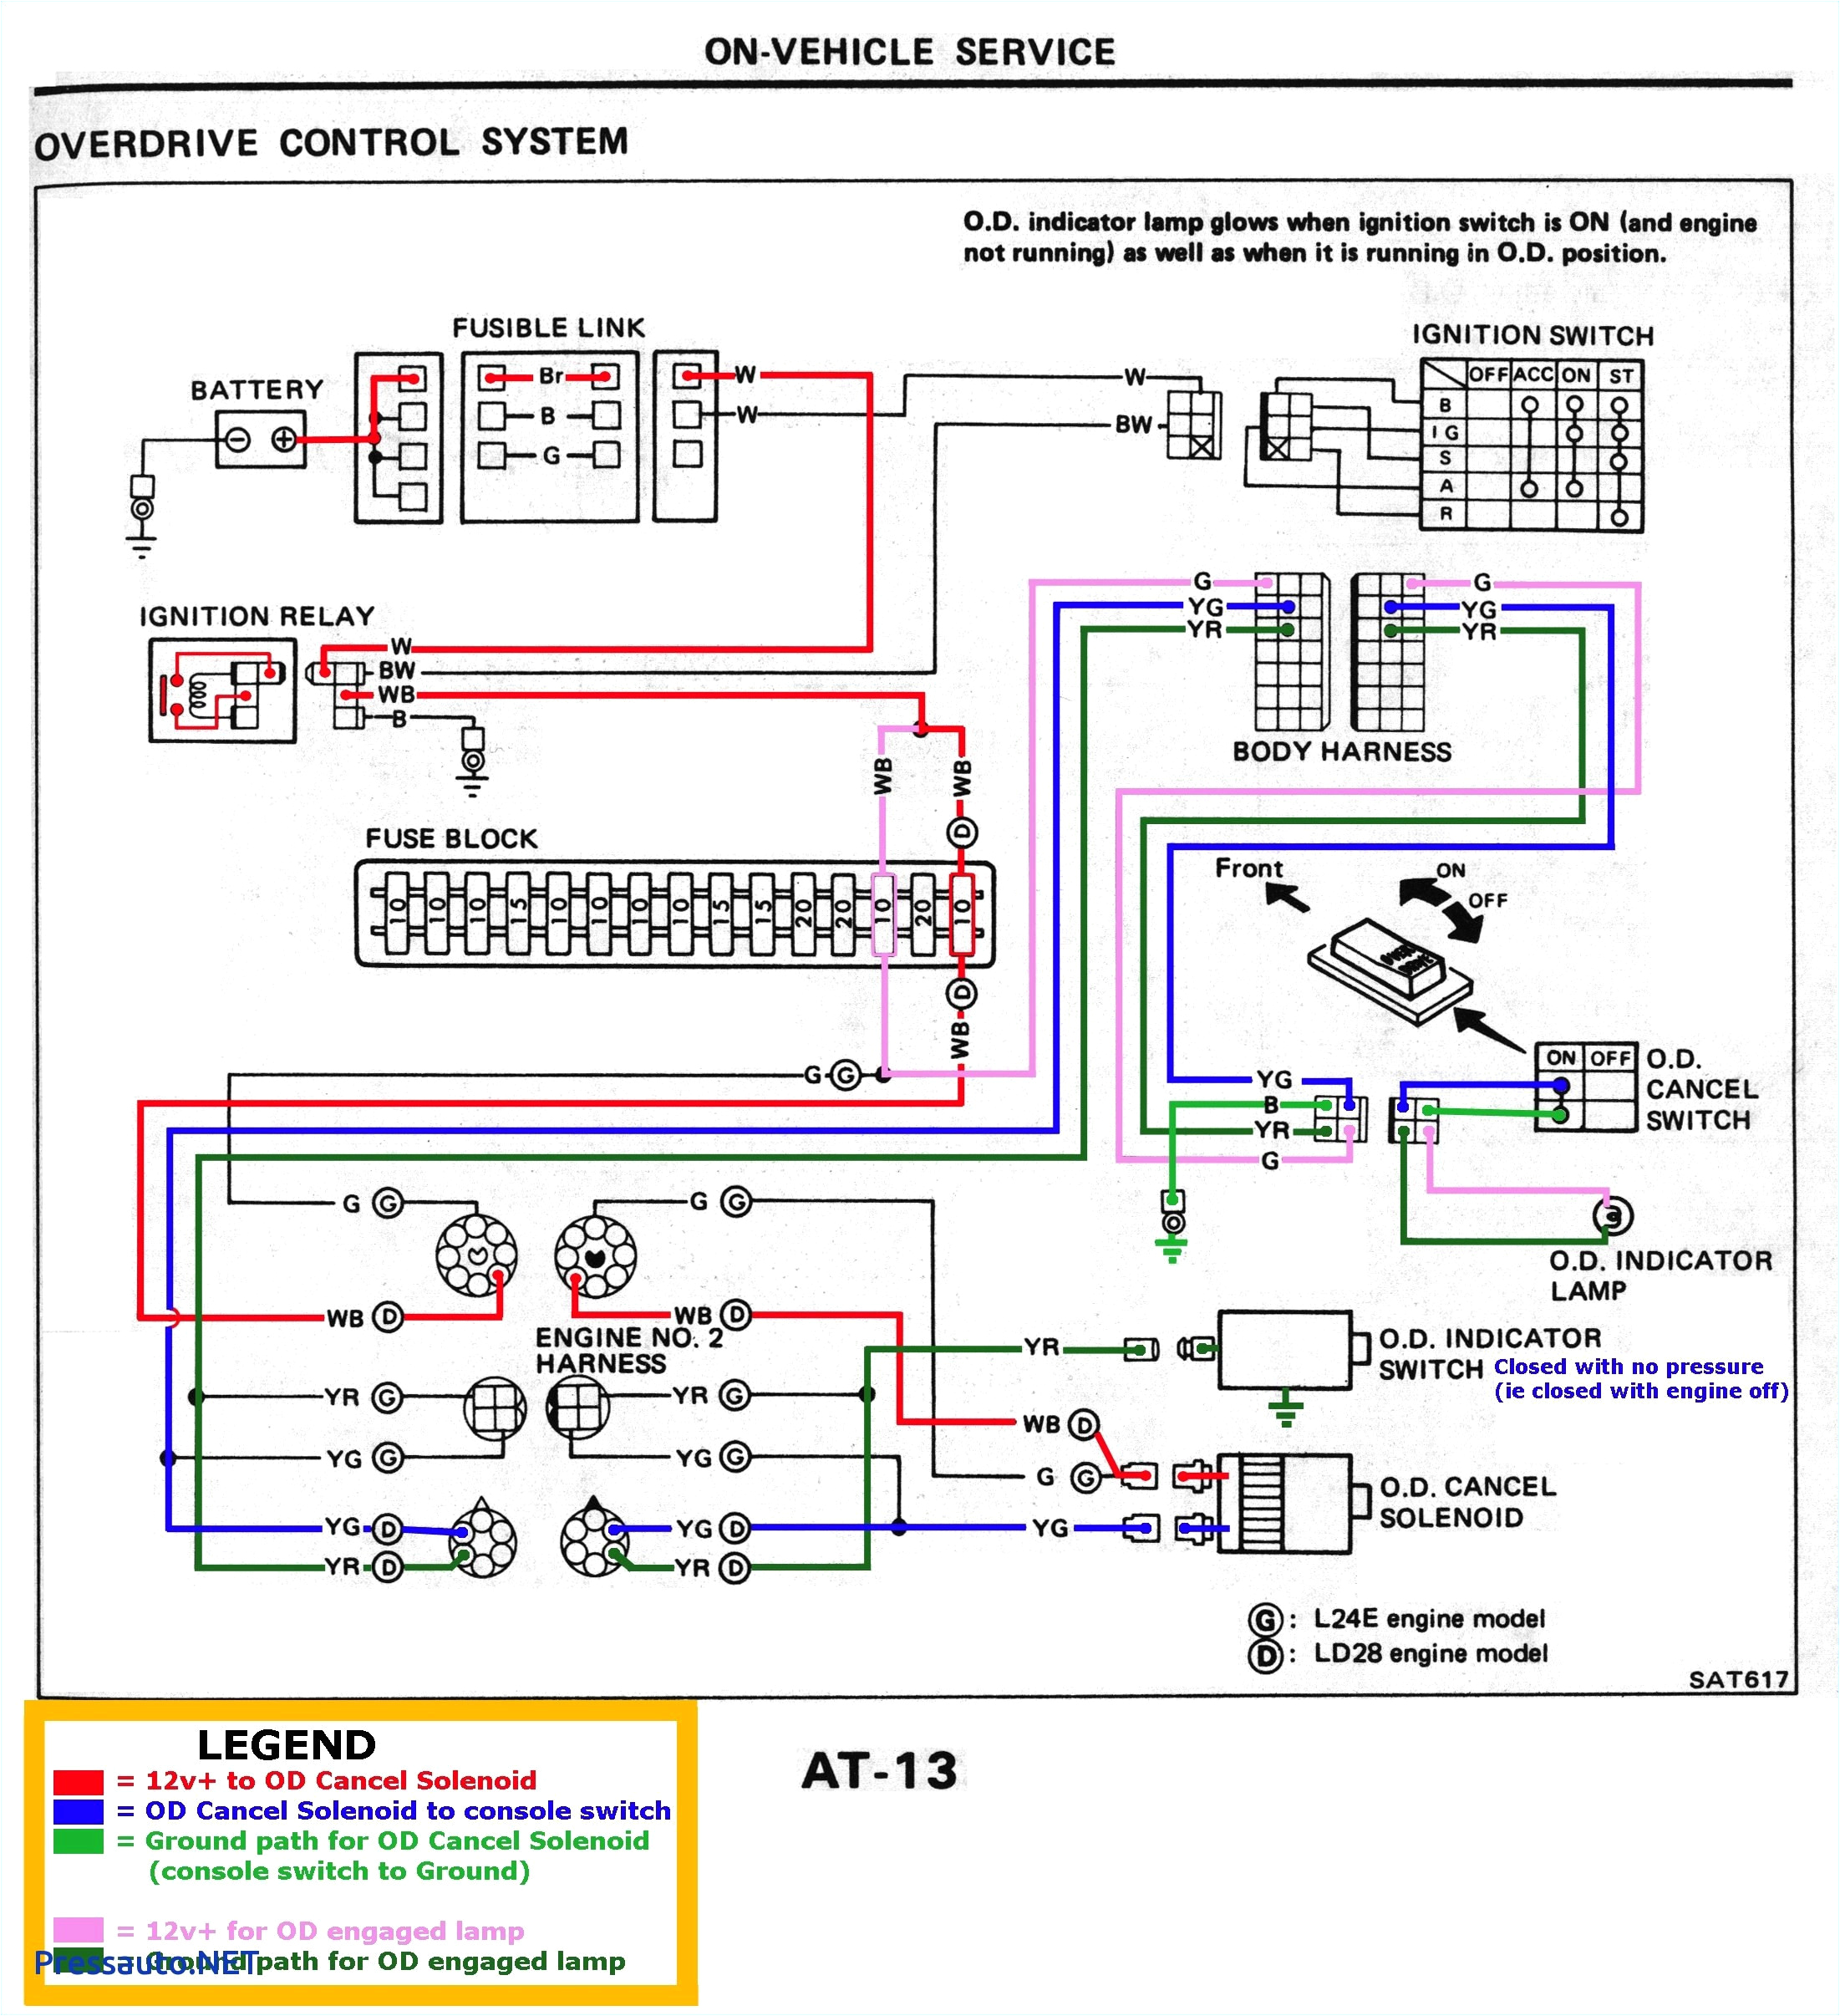 Pride Mobility Scooter Wiring Diagram Freedom Mobility Scooters Wiring Diagram Wiring Database Diagram